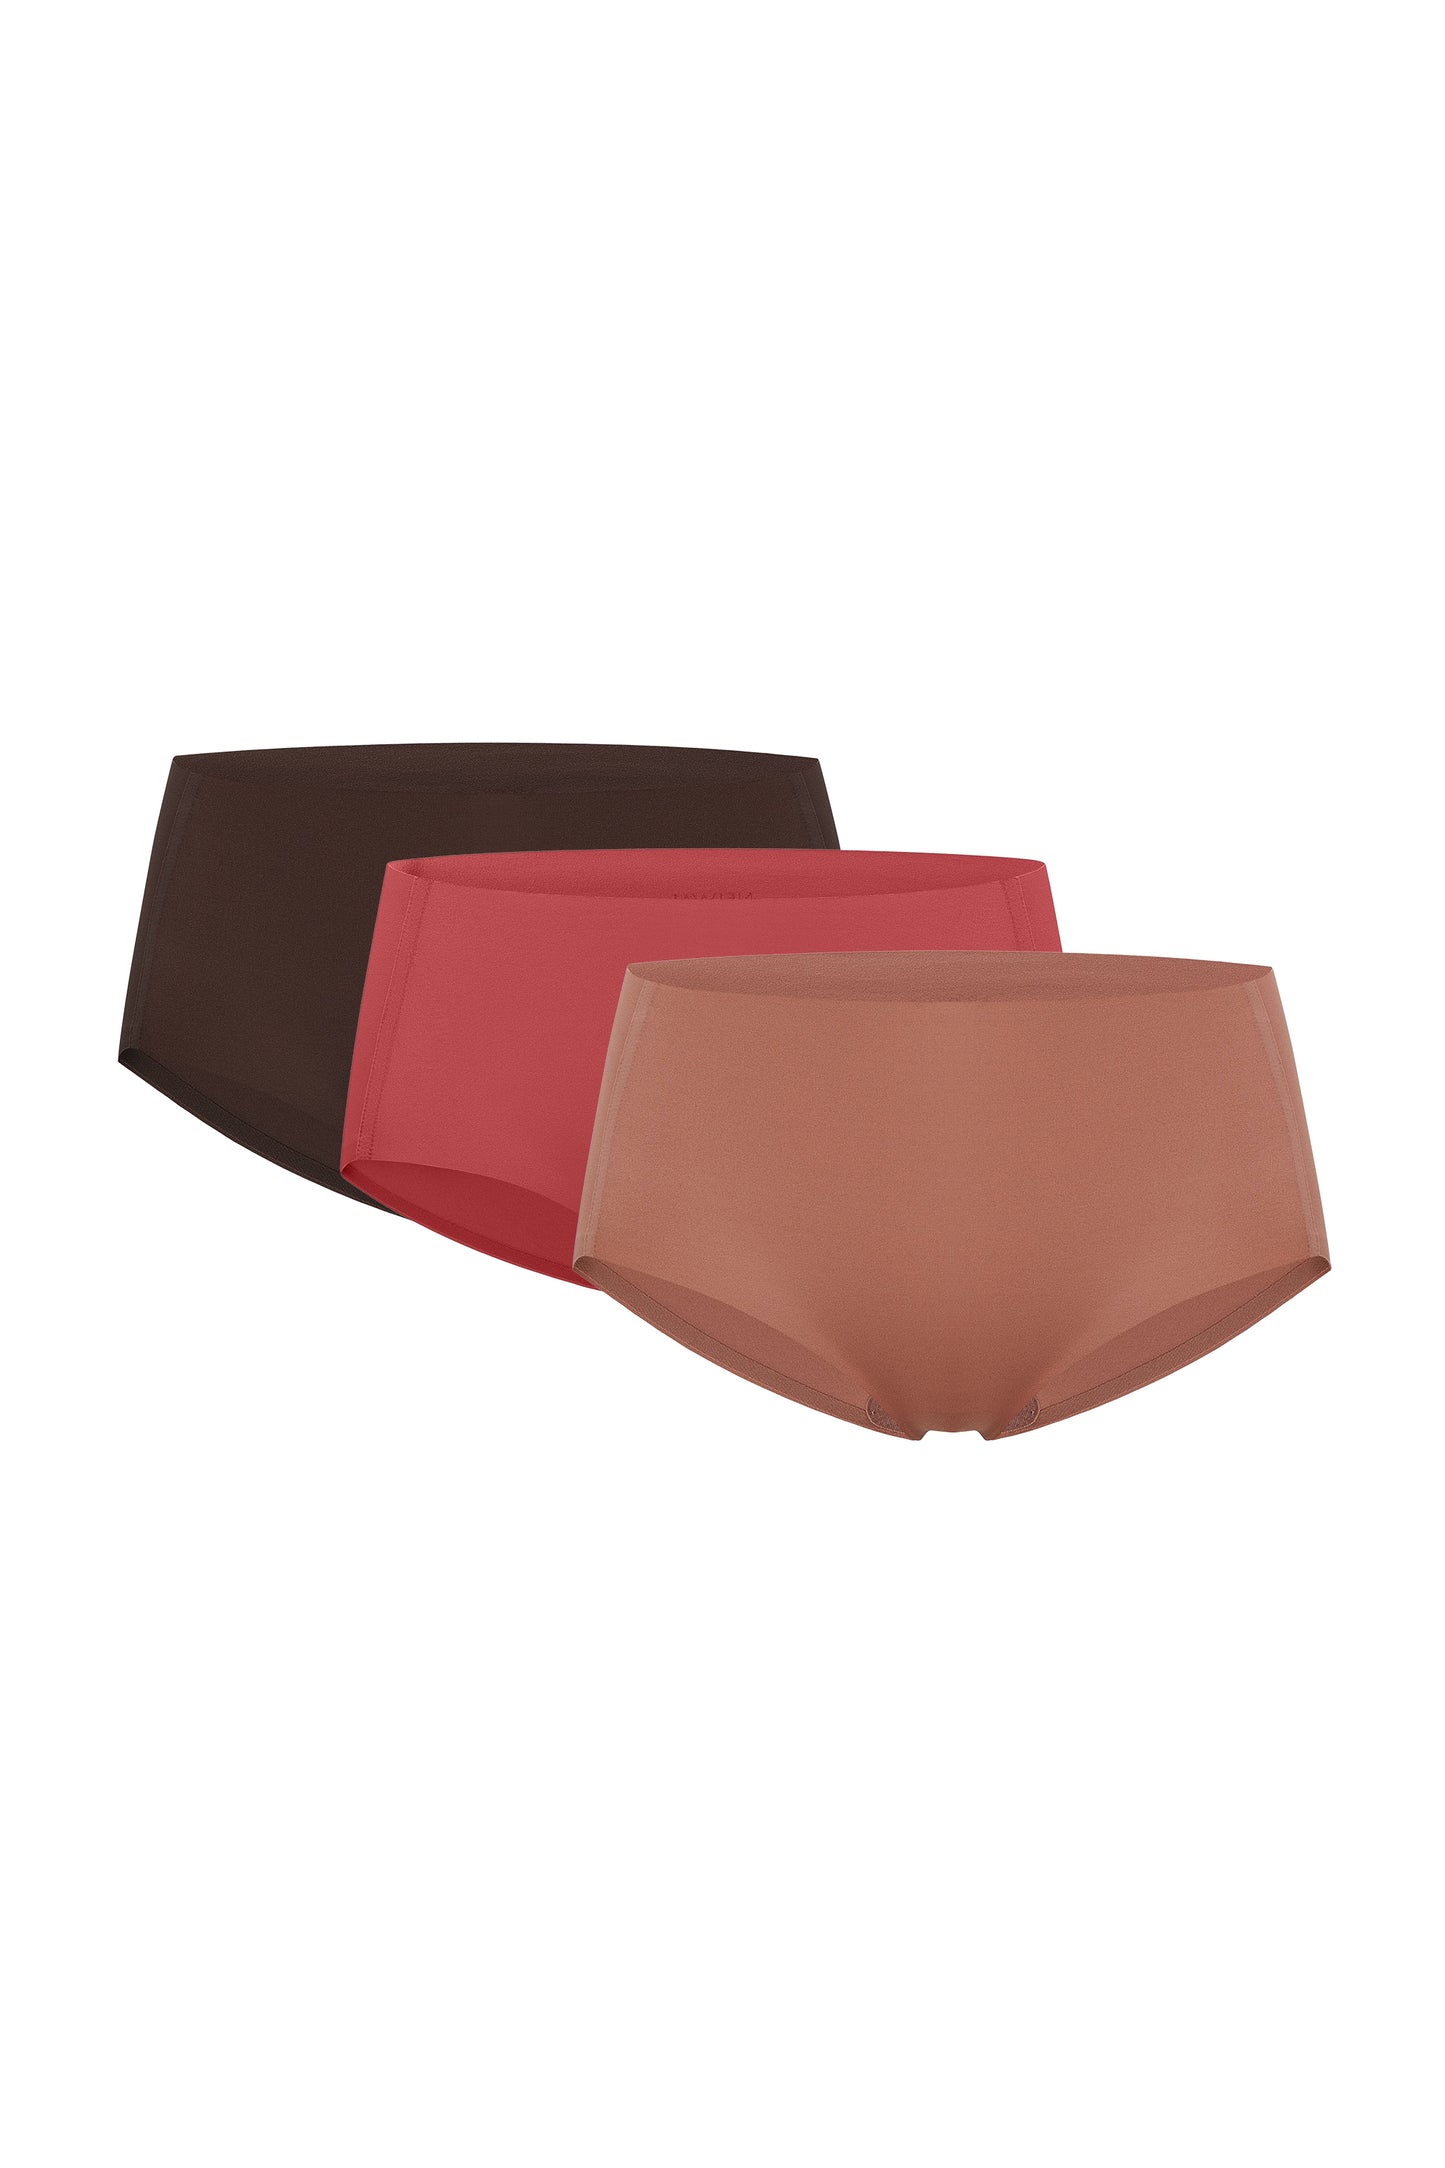 Flay lay images of rust-colored underwear, red underwear, and brown underwear